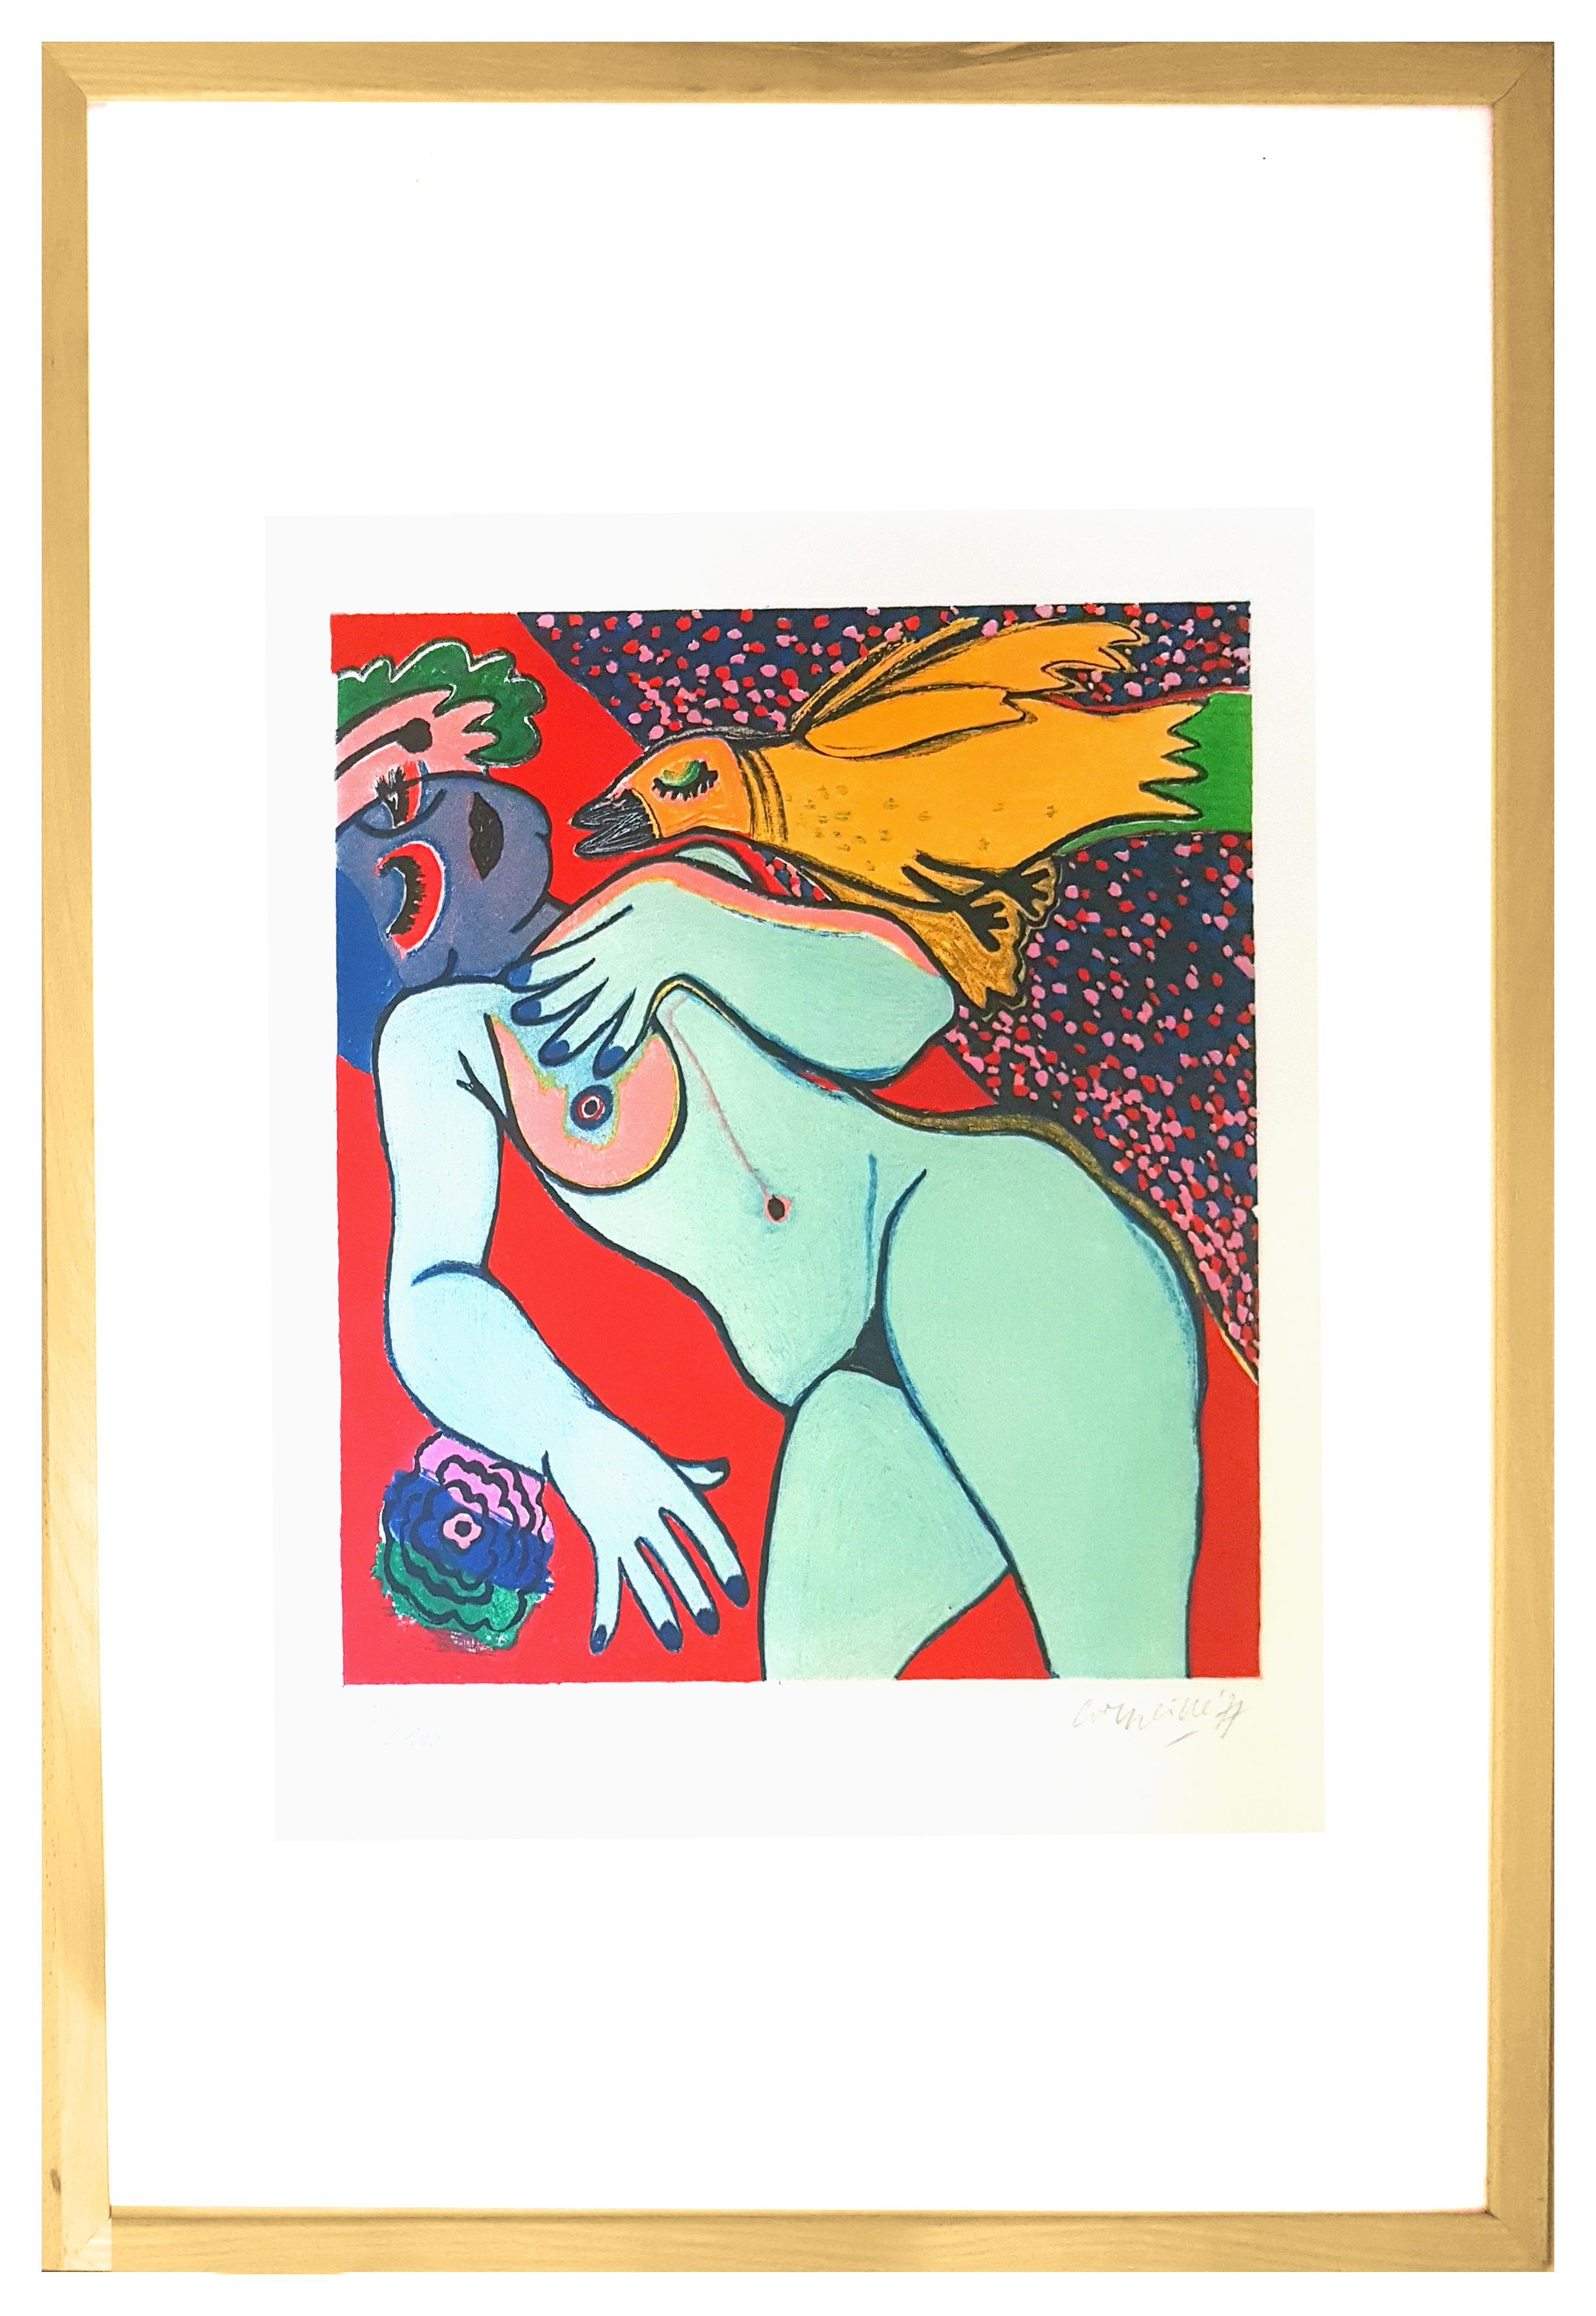 Nude is a gorgeous original lithograph realized by Corneille (Guillaume van Beverloo) in 1977. Hand signed and dated in pencil on the lower right margin; edition of 100 prints. Perfect conditions.
It is an interesting representation of a female